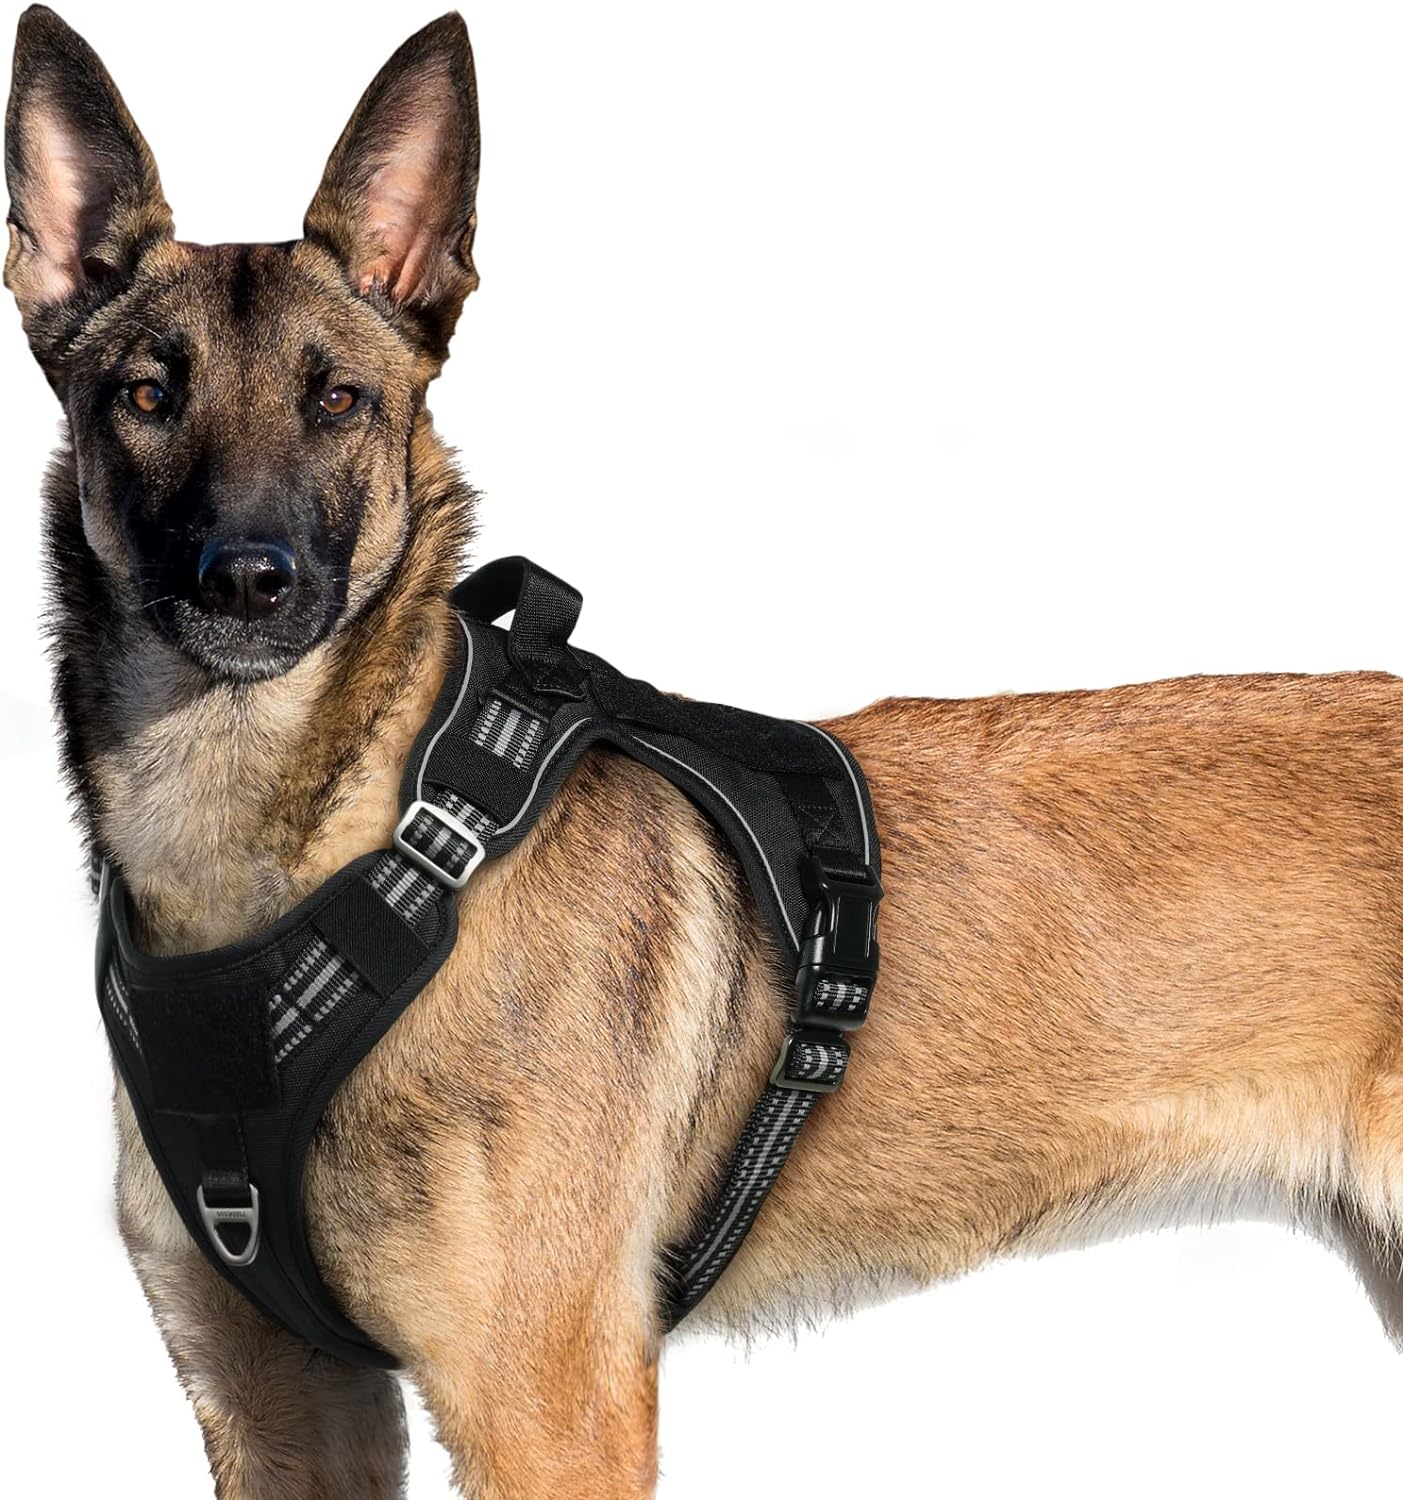 rabbitgoo Dog Harness No Pull, Military Dog Harness for Large Dogs with Handle  Molle, Easy Control Service Dog Vest Harness Training Walking, Adjustable Reflective Tactical Pet Harness, Black, XL